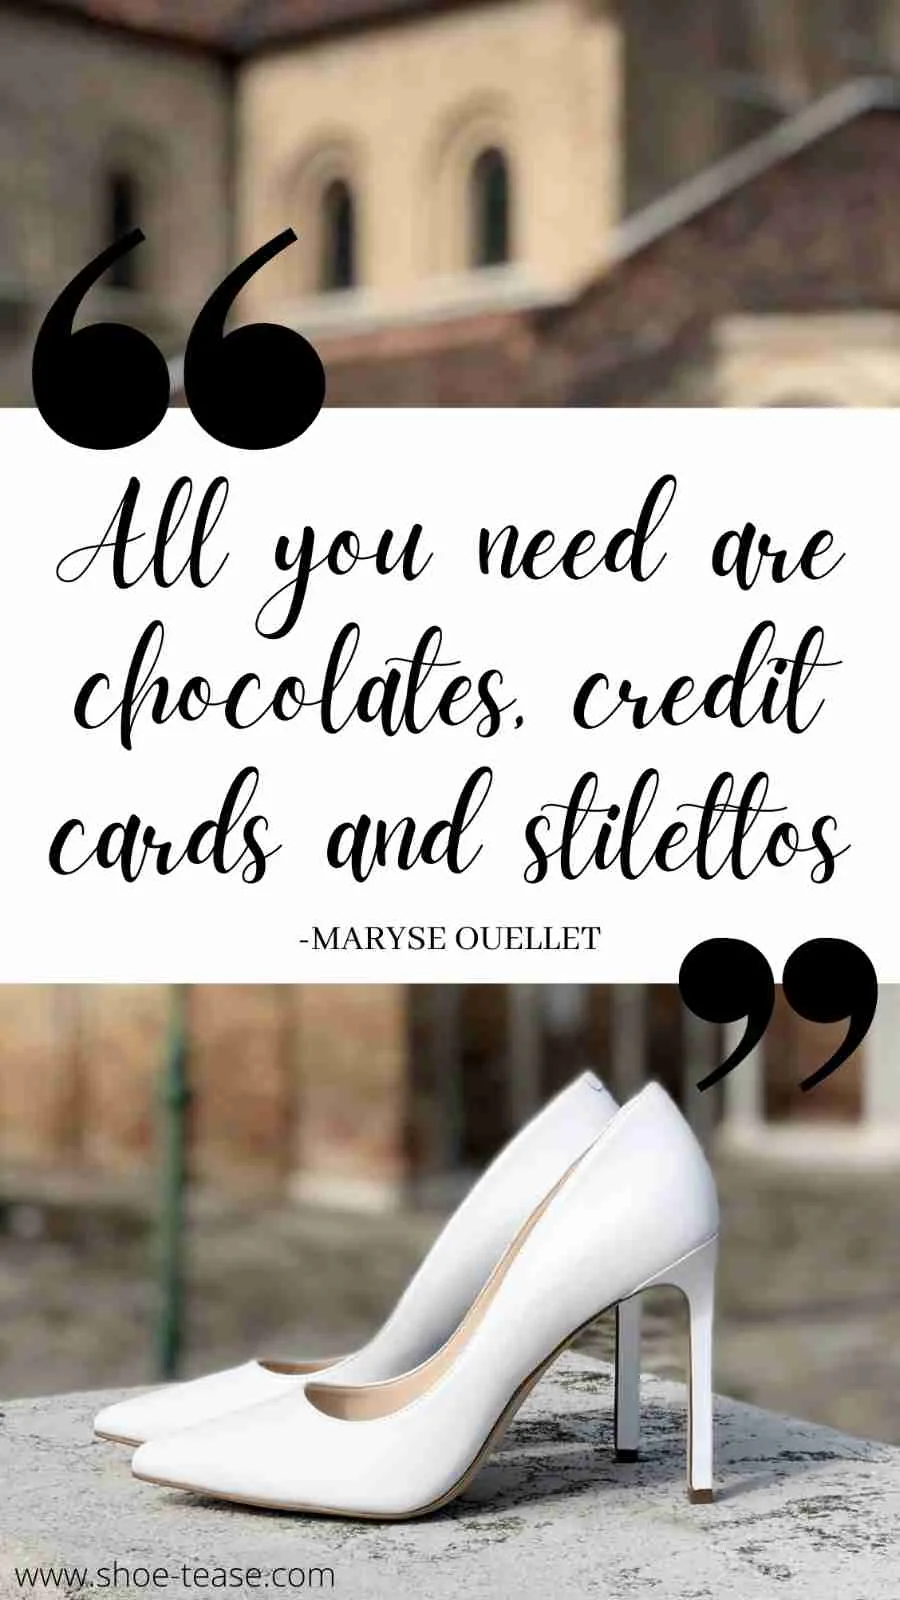 Stiletto Quotes All you need are chocolates credit cards and stilettos.jpg